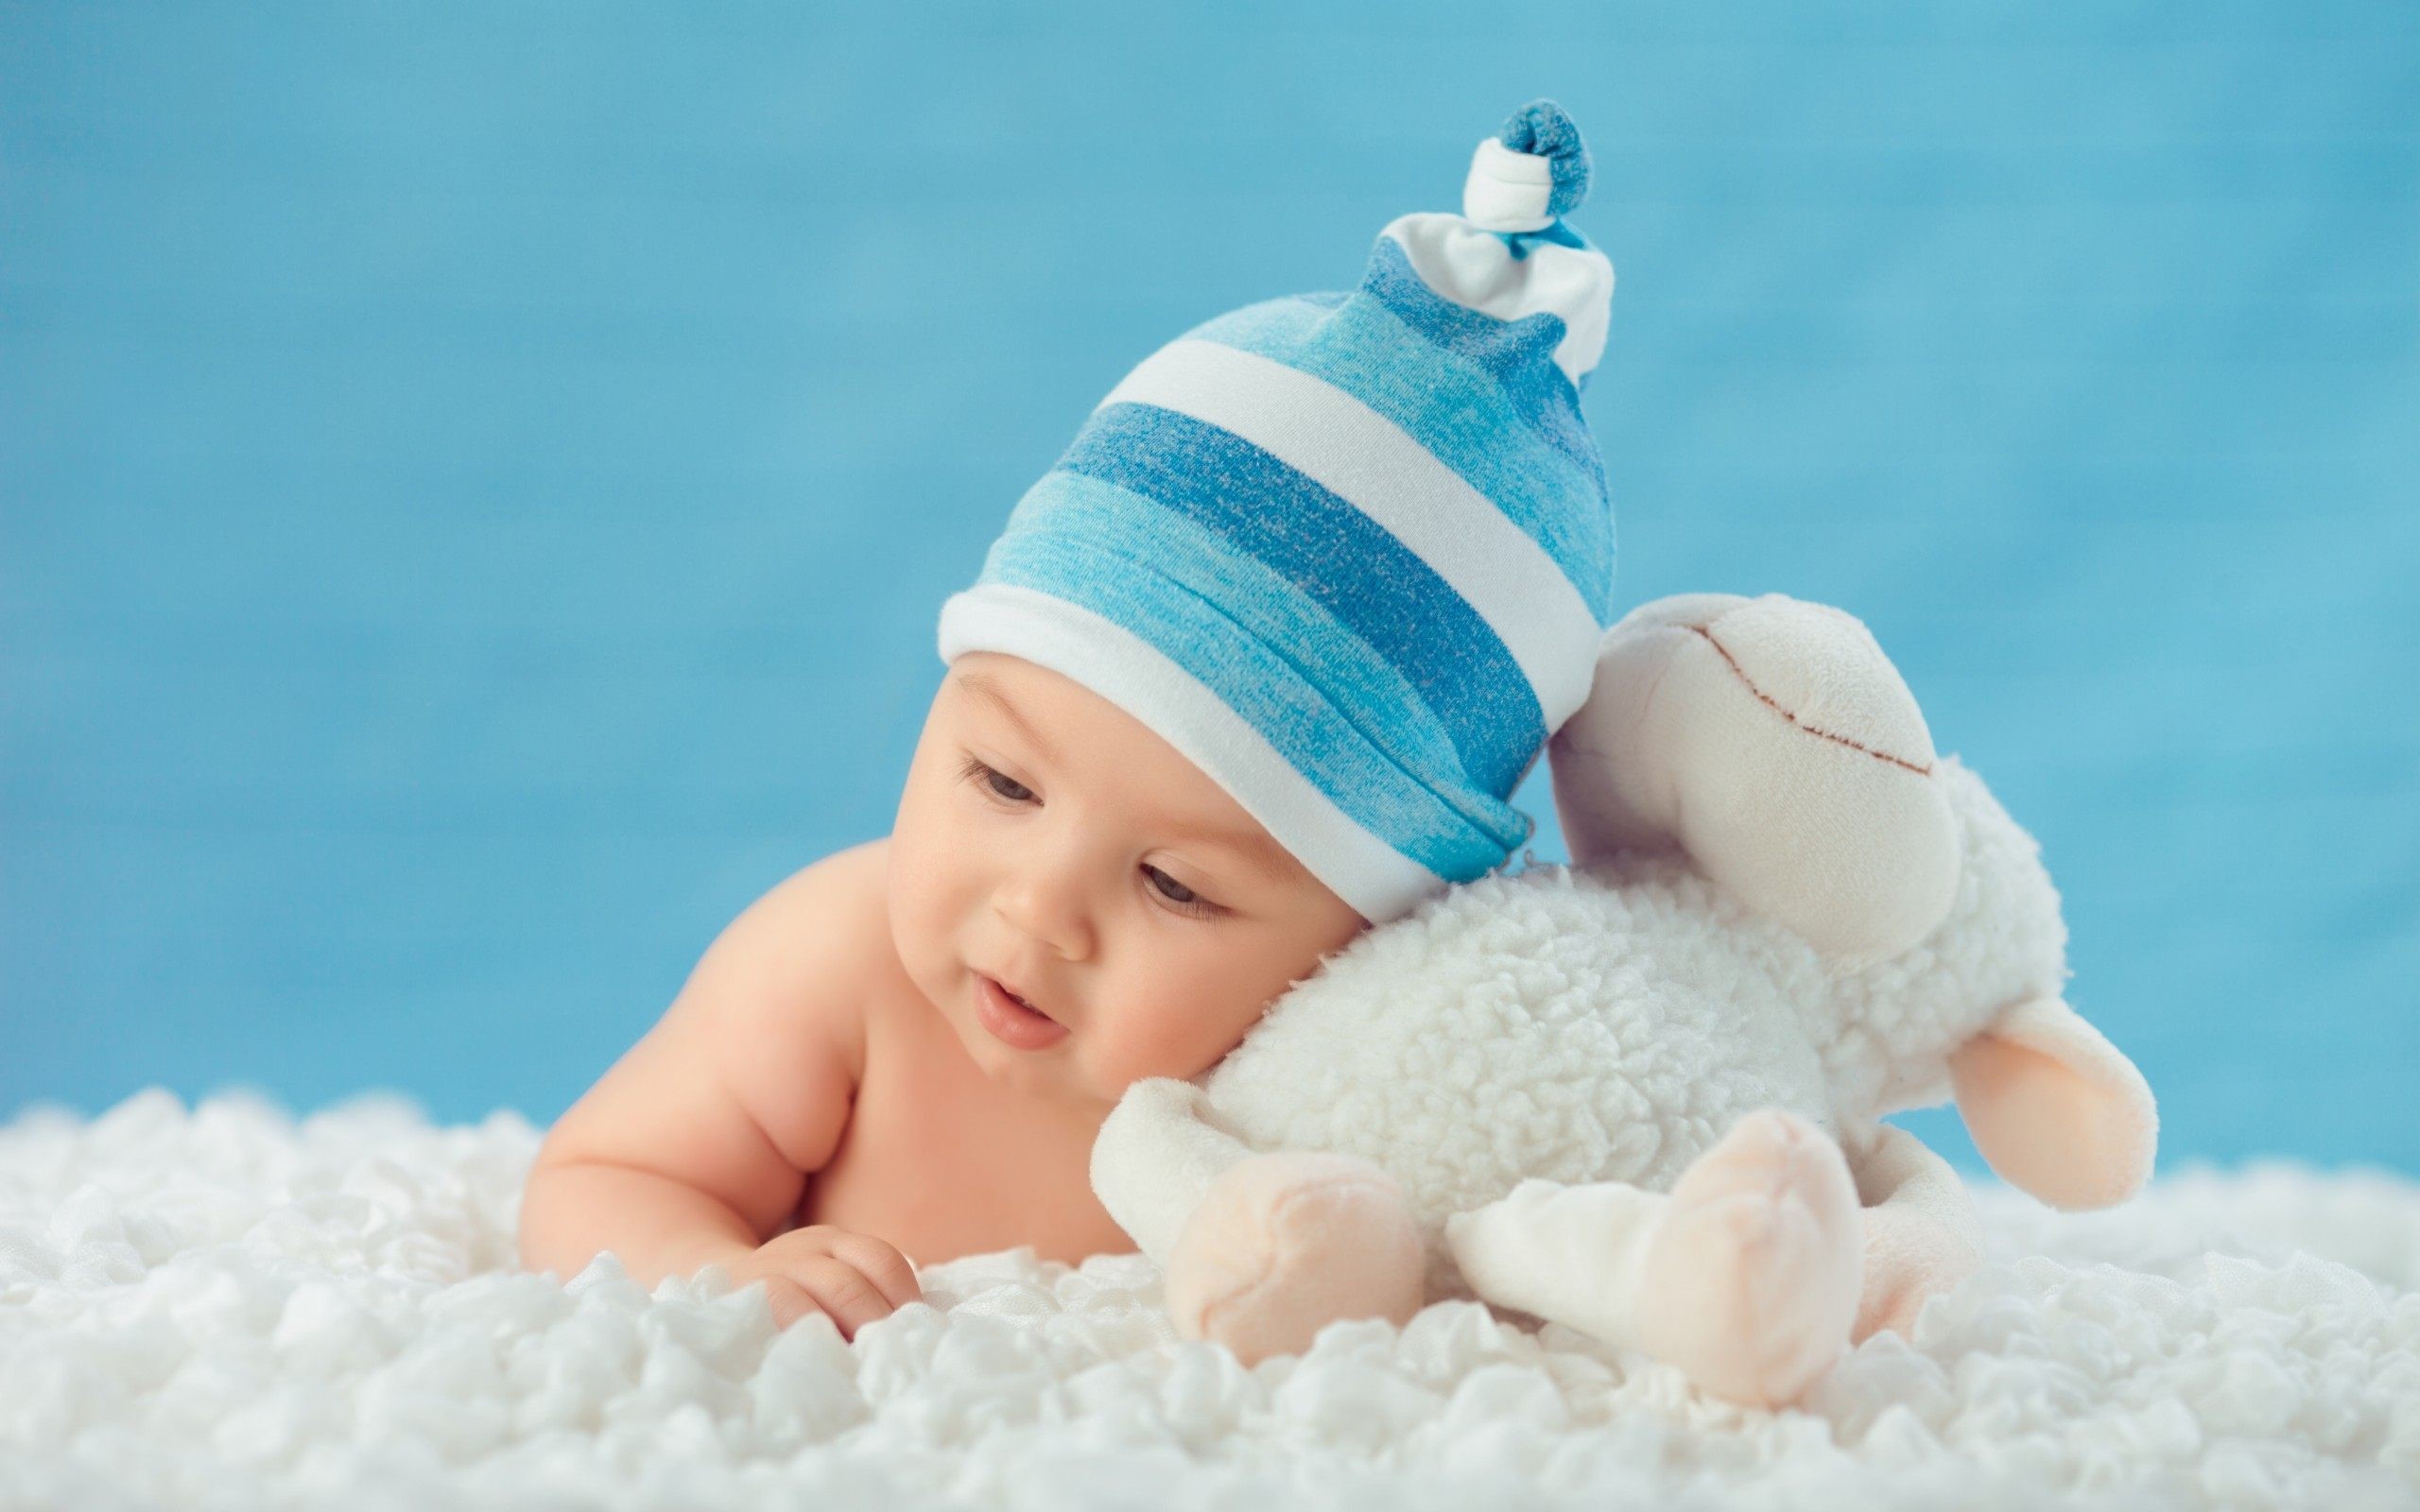 2560x1600 11-infant-baby-picture-sleeping-baby-wallpaper-cute-